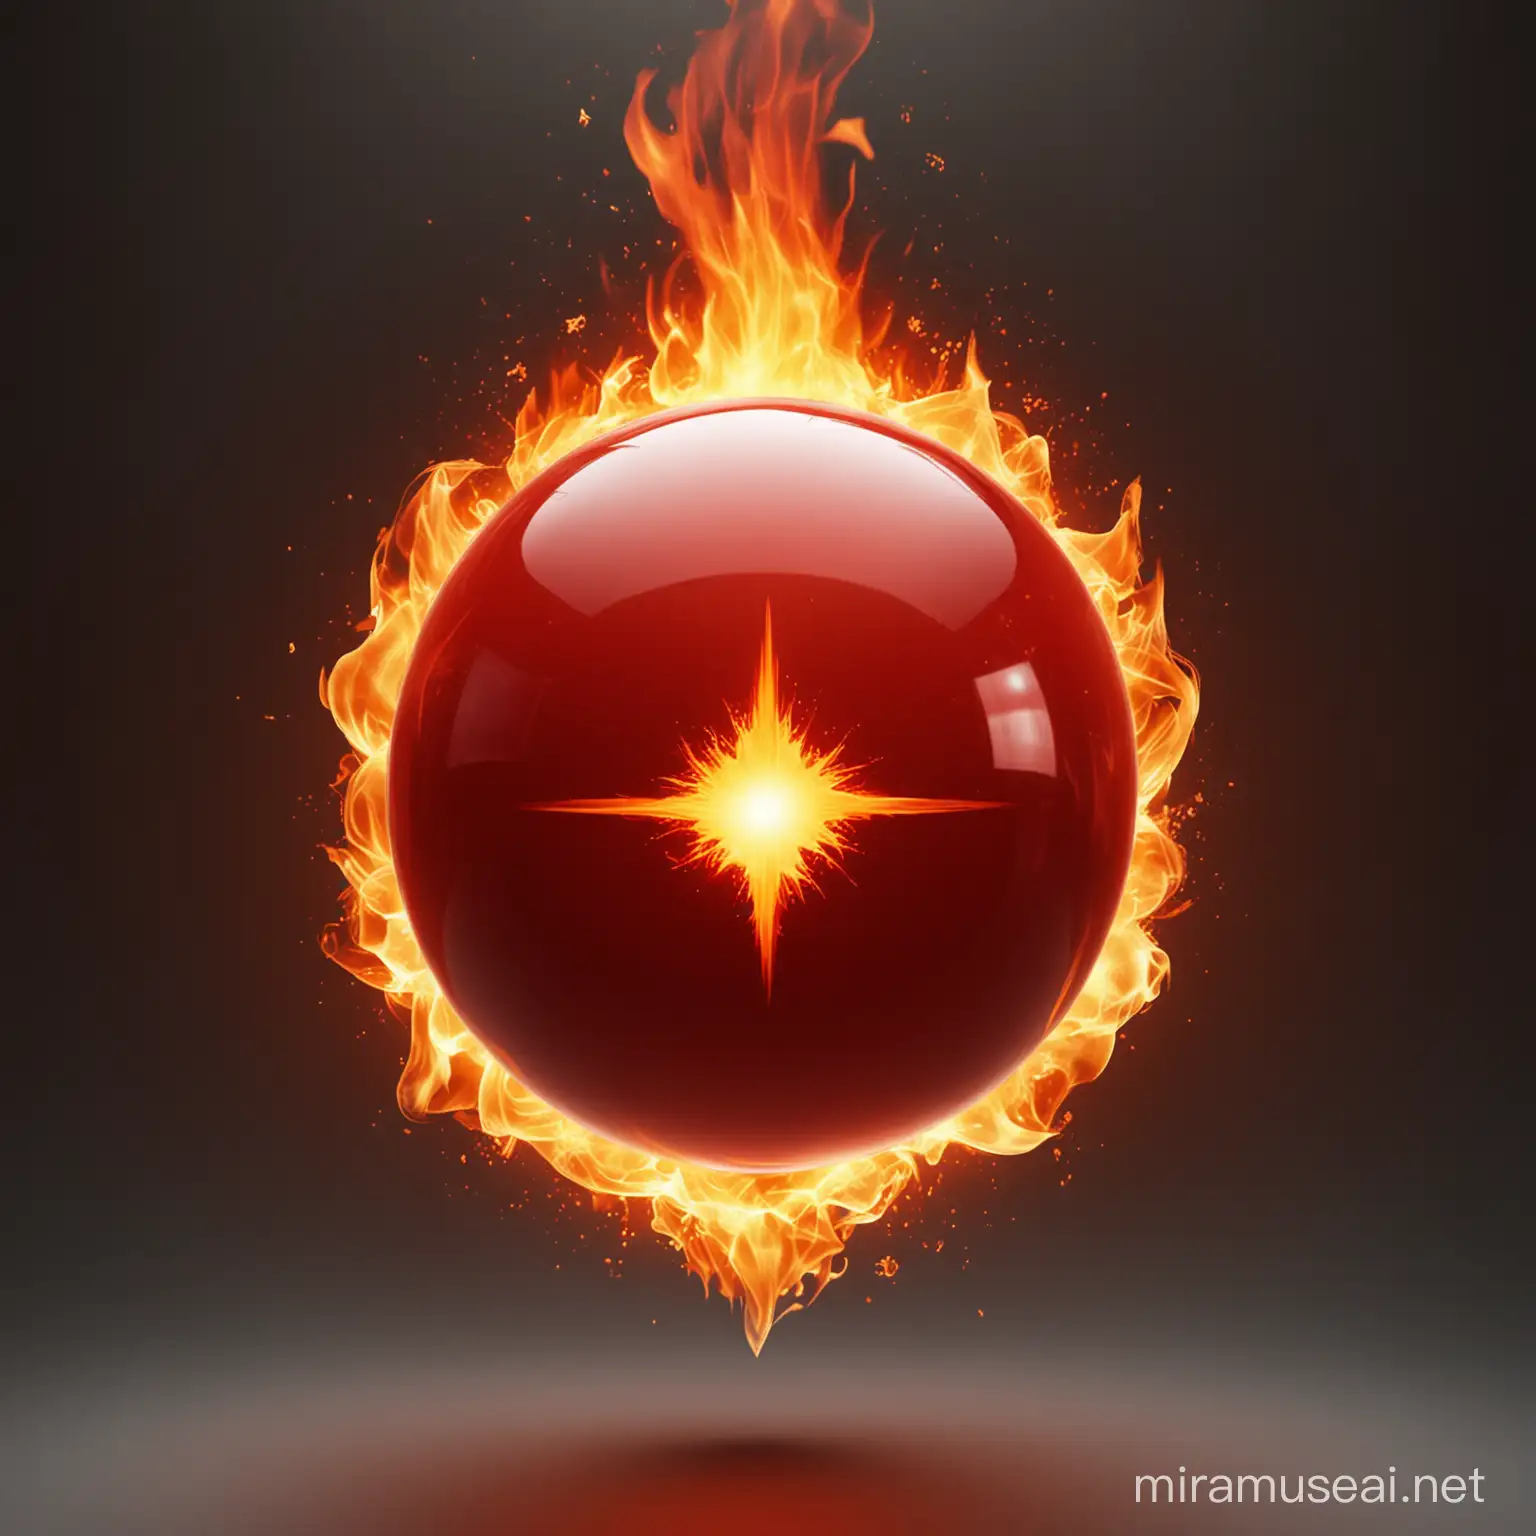 Glossy Red Orb with Fiery Fire Symbol Centerpiece